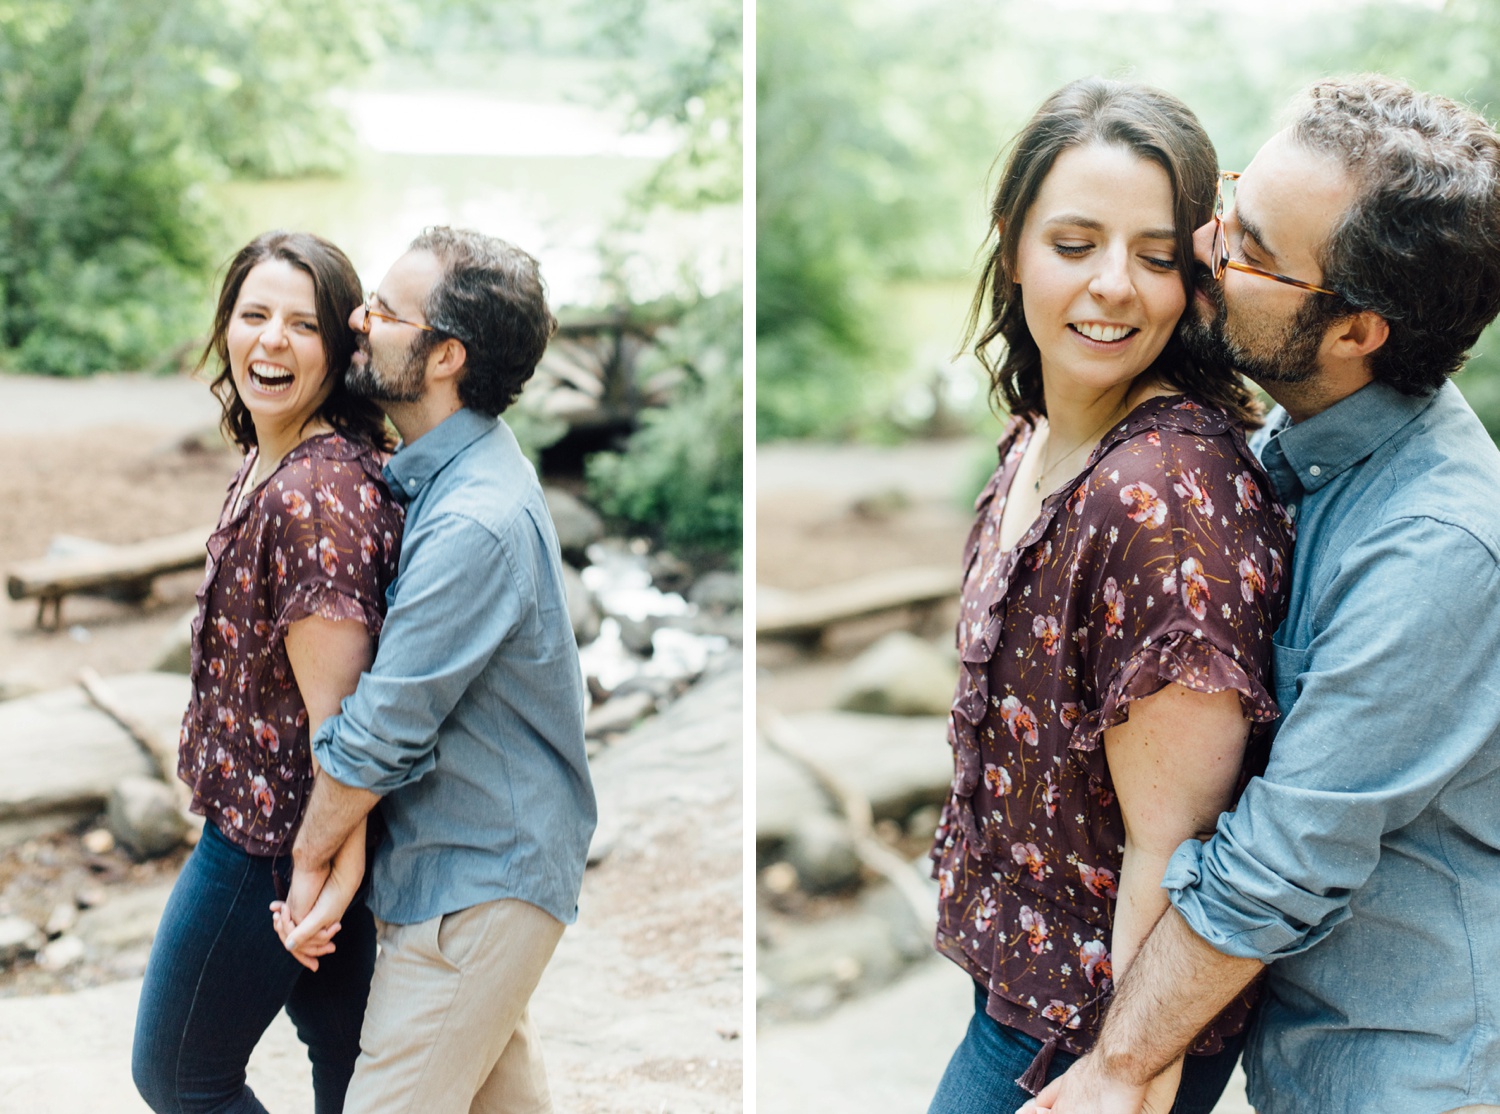 Mollie + Andrew - Central Park Engagement Session - Alison Dunn Photography photo